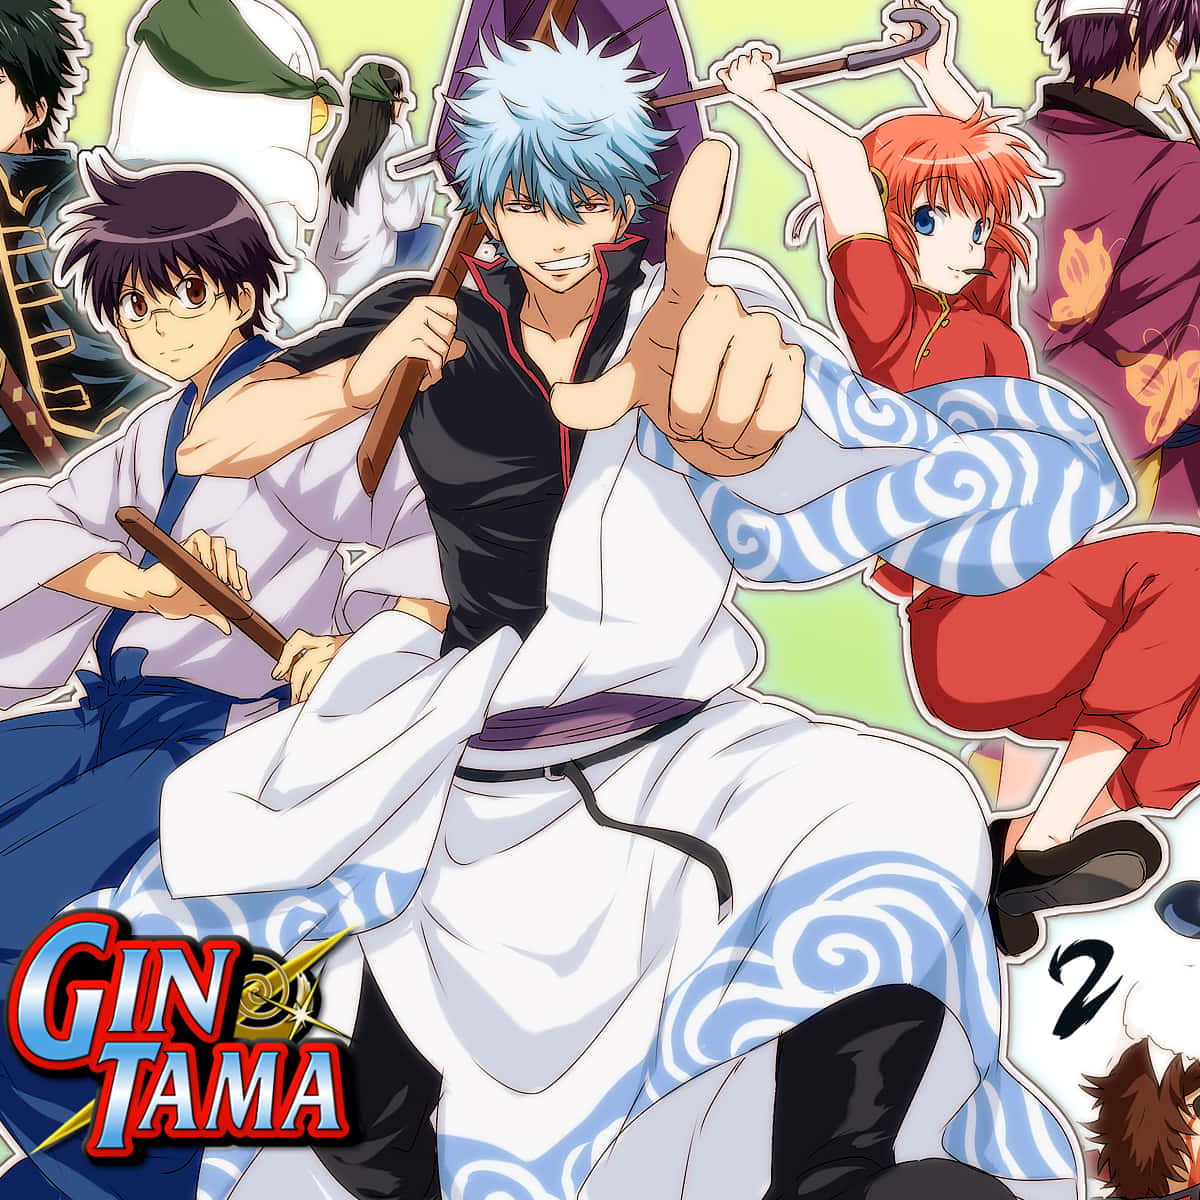 Gintama: Even the strongest of bonds can be broken